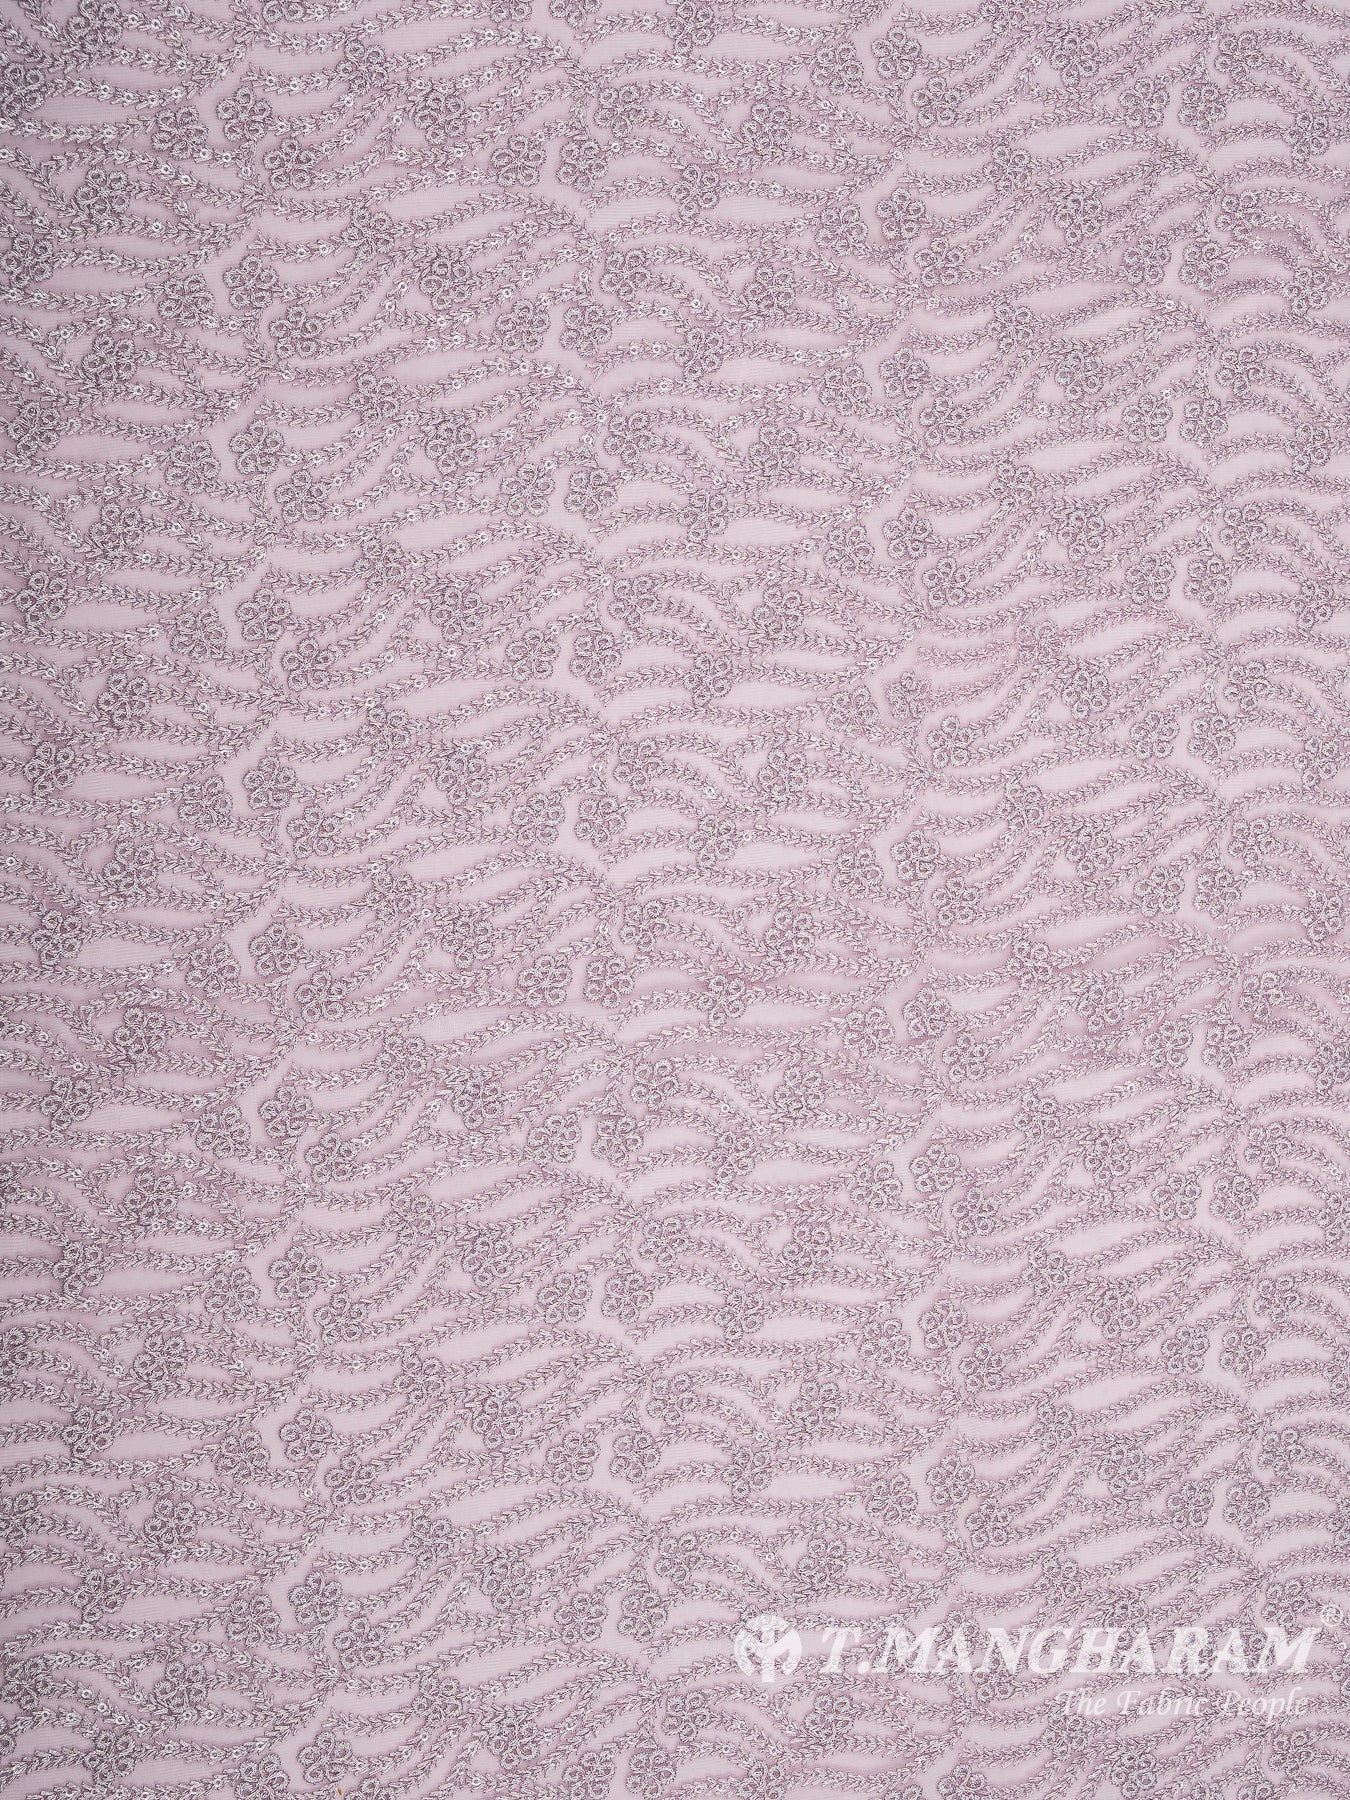 Pink Net Embroidery Fabric - EC8430 view-3